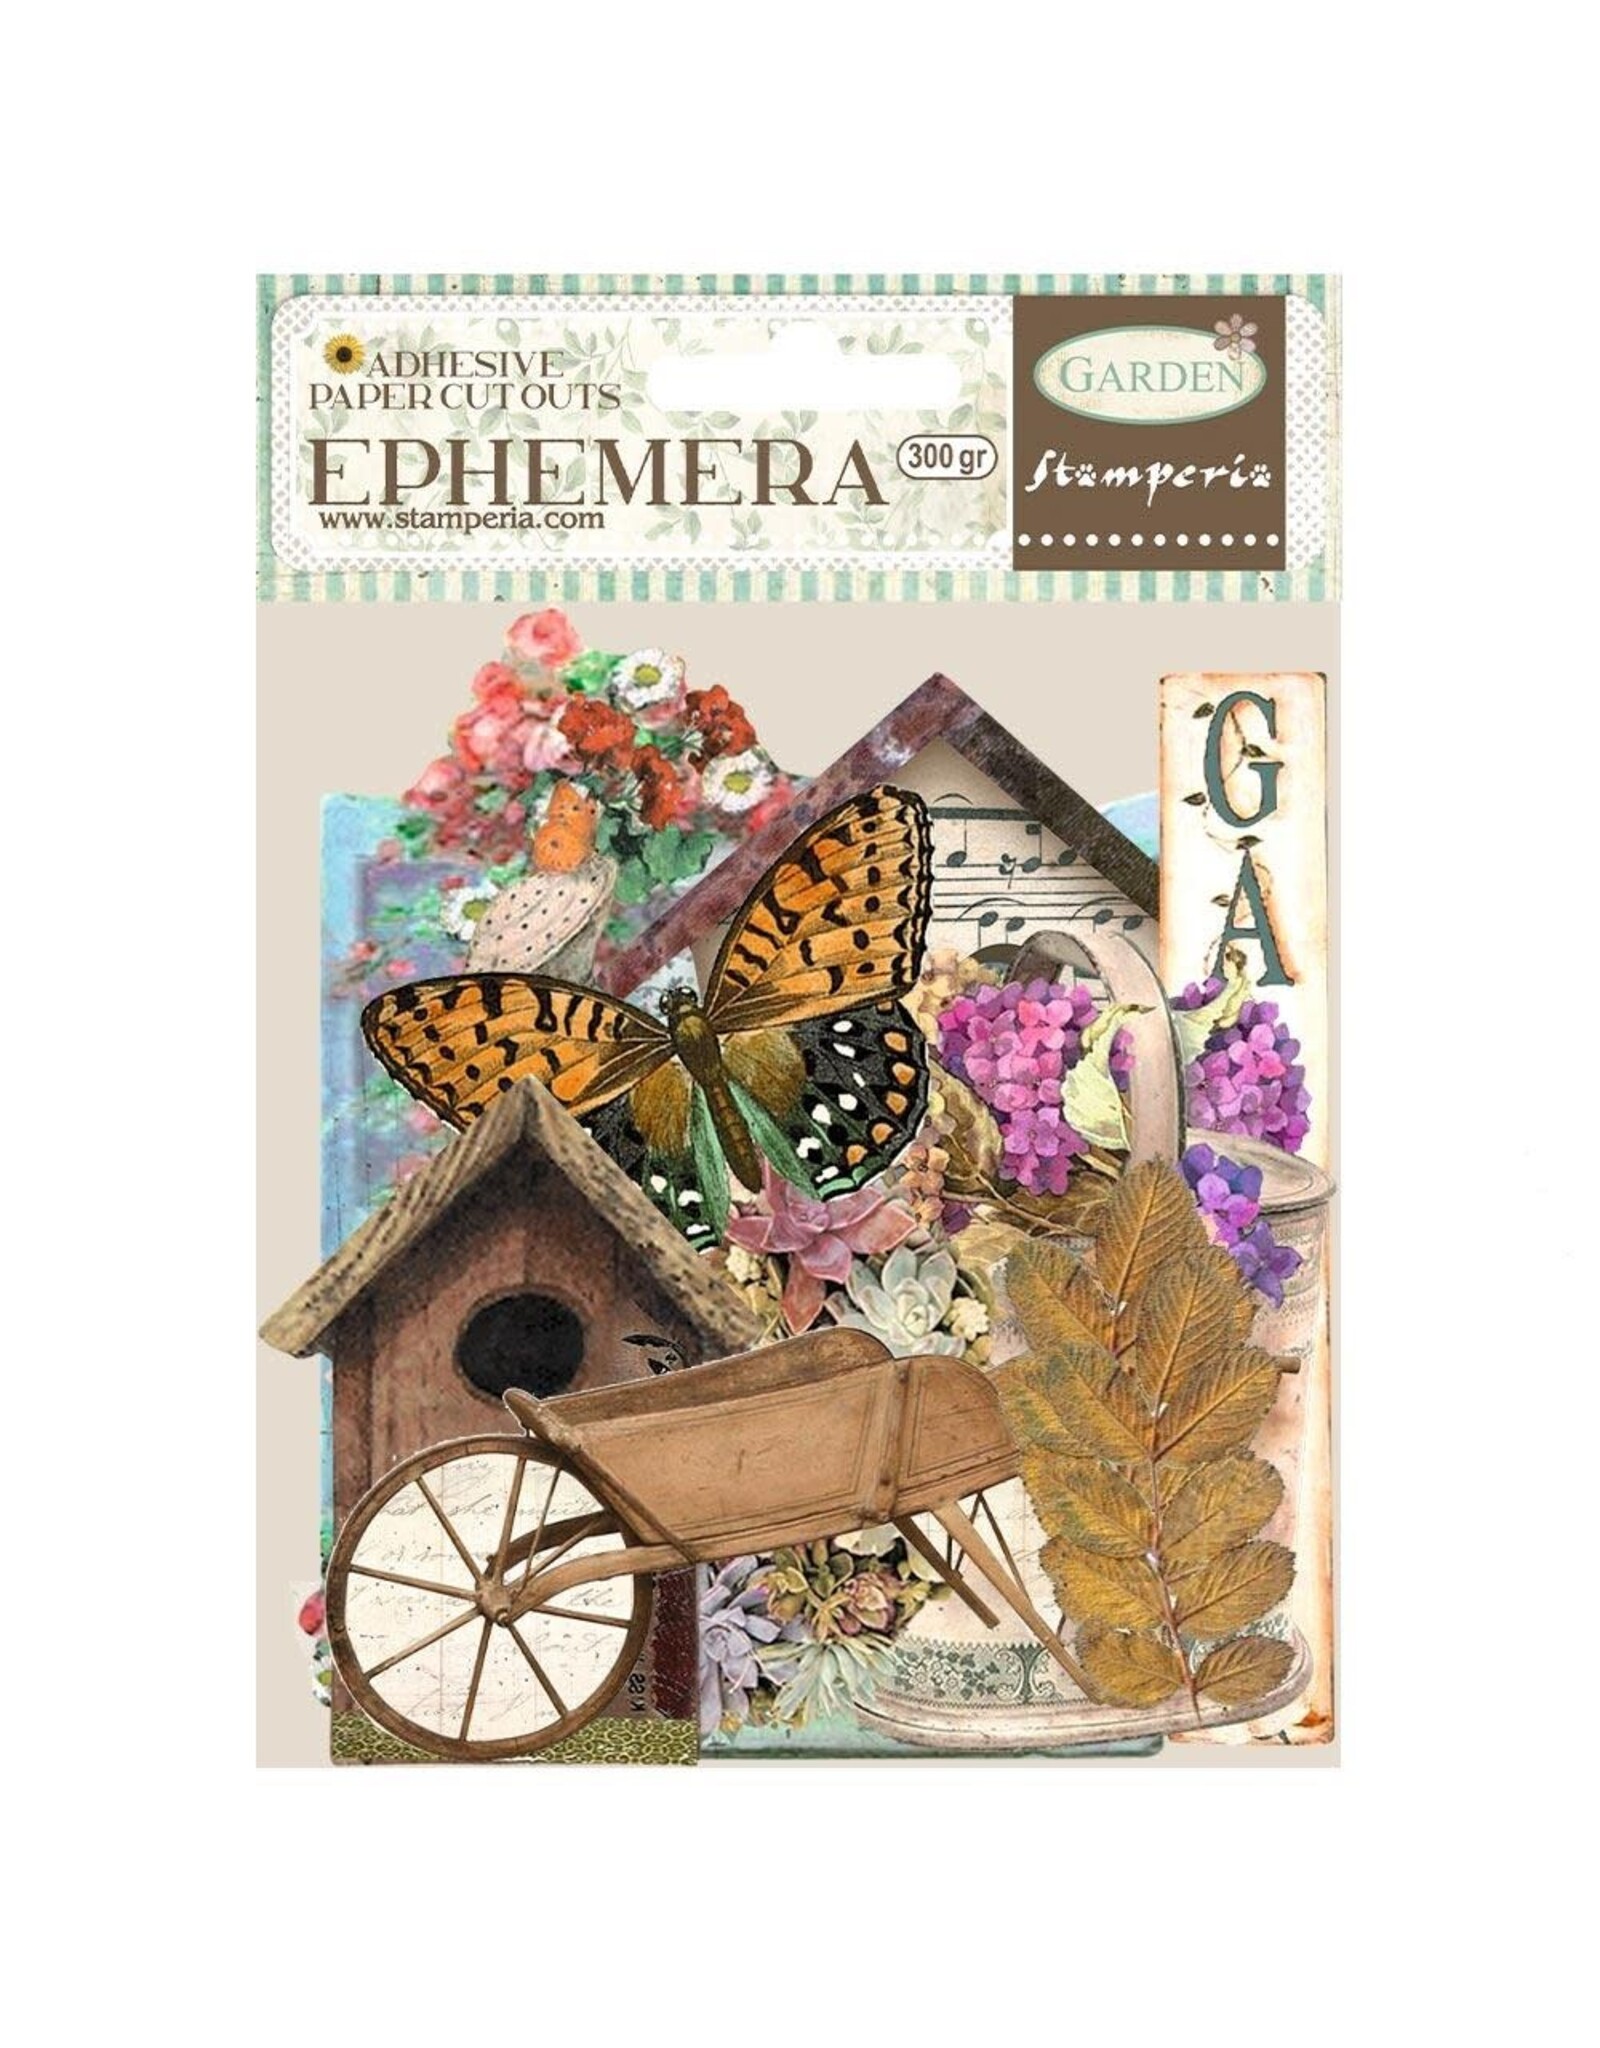 STAMPERIA STAMPERIA GARDEN ADHESIVE PAPER CUT OUTS